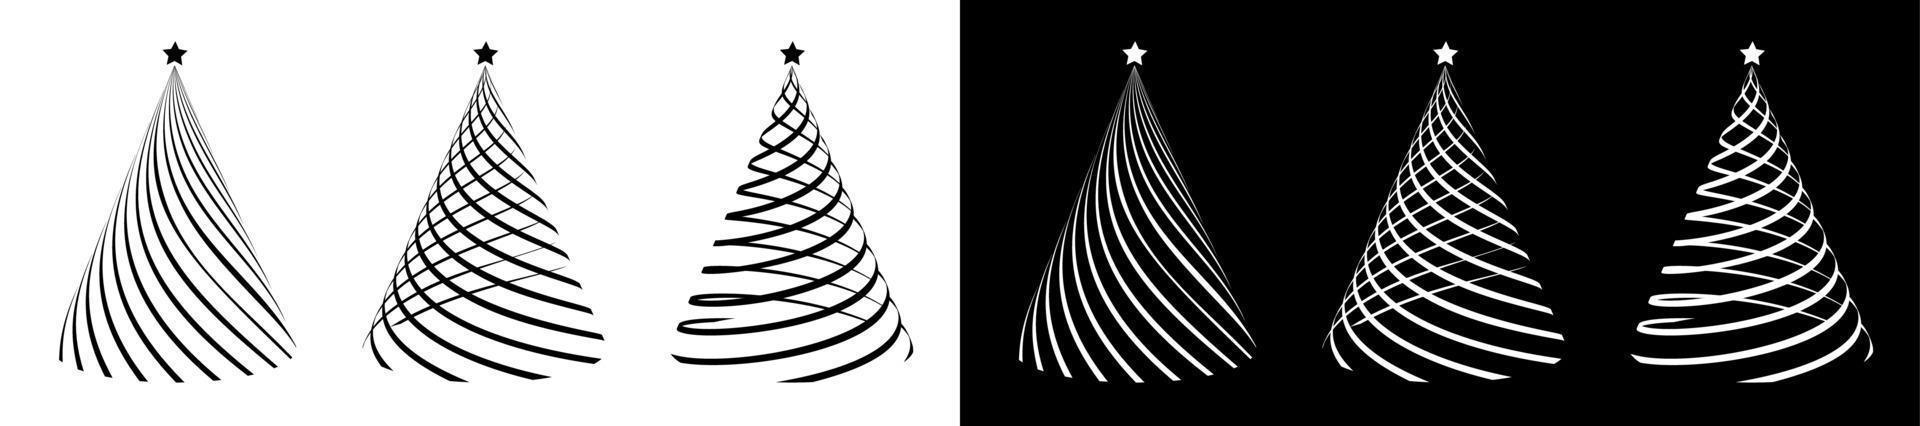 Set of silhouettes of Christmas trees, stylized entwined with a festive ribbon. Christmas and New Year 2021. Icons. Black and white vector